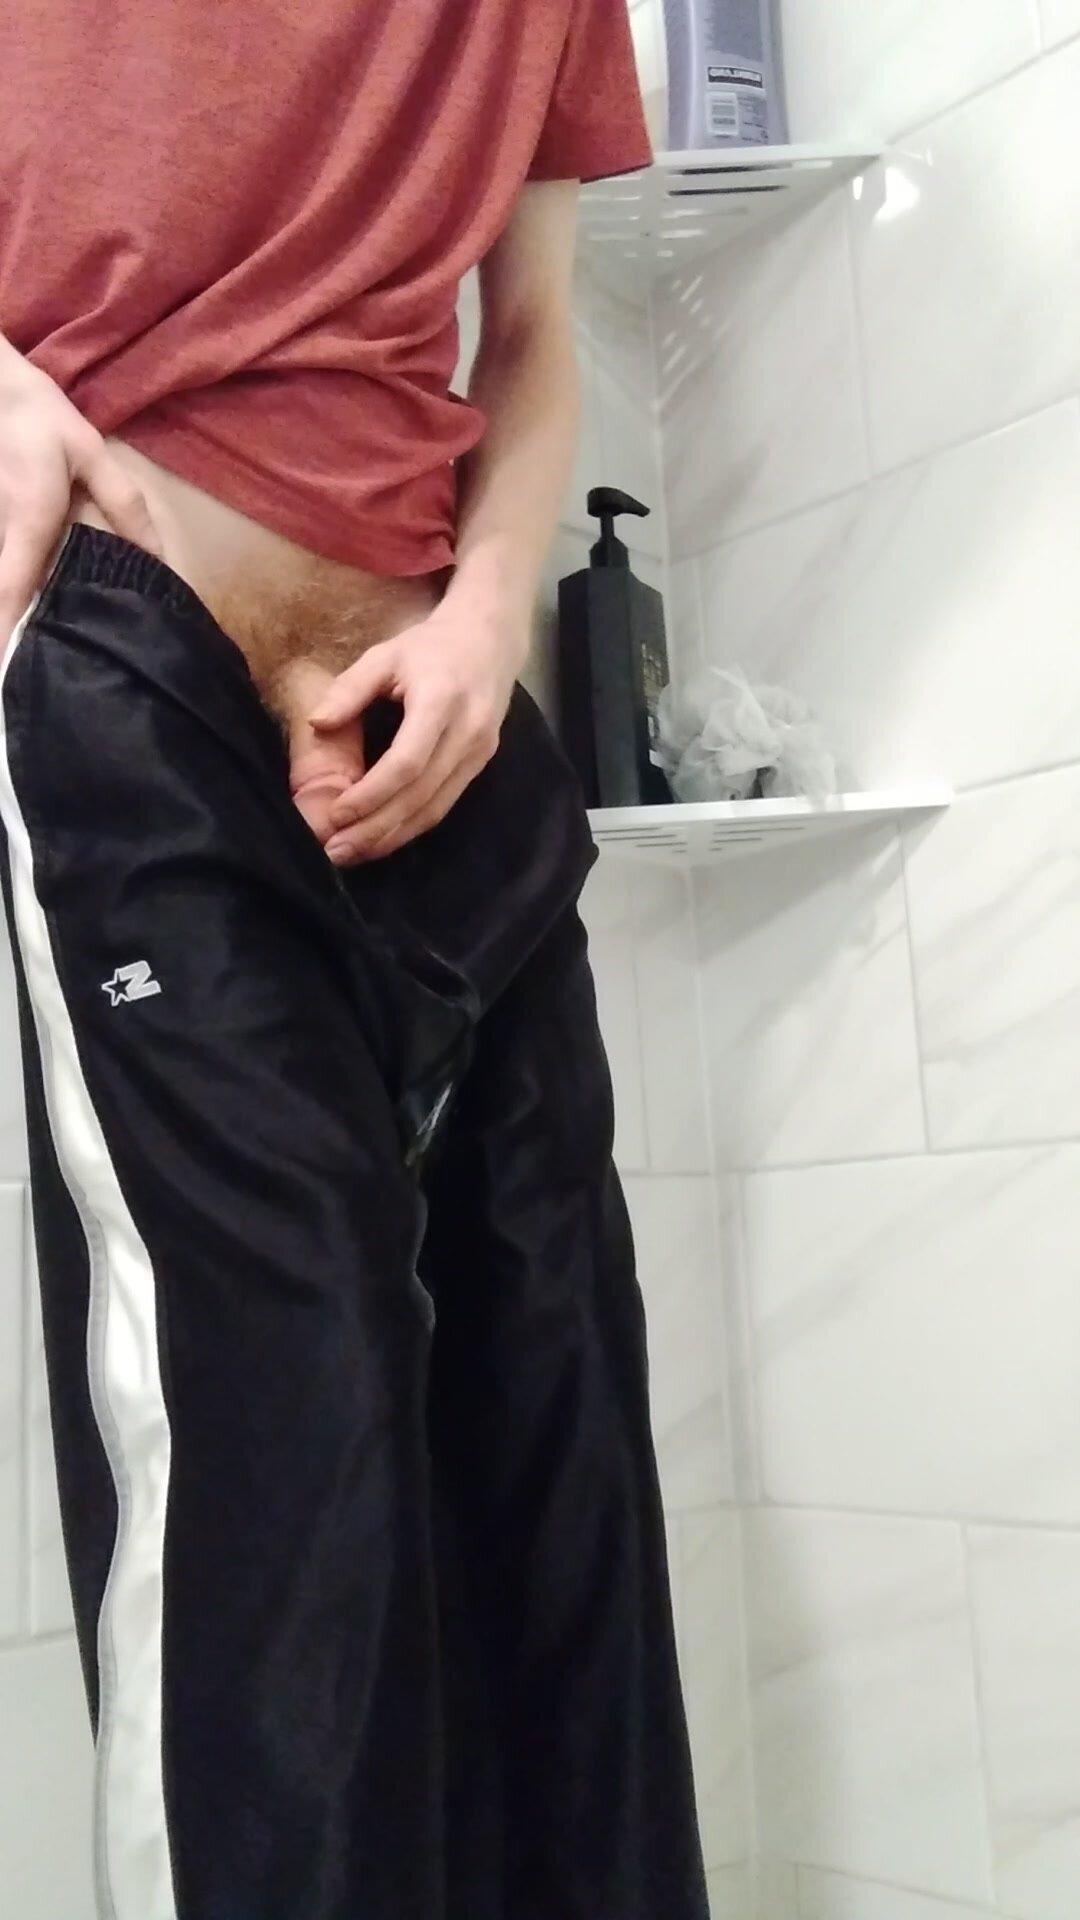 Pissing on top of my basketball pants